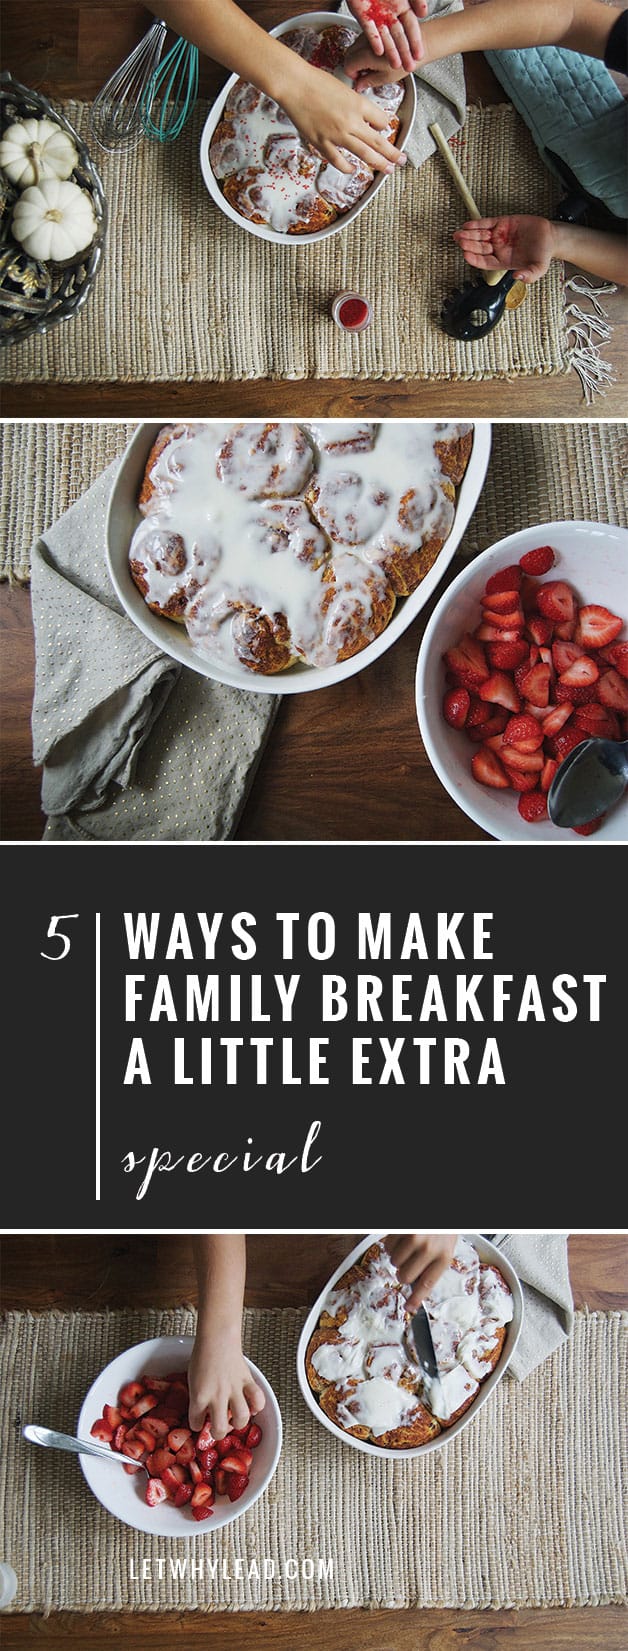 5 Ways to Make a Family Breakfast a Little Extra SPECIAL | Great for birthdays and special occasions but also just for regular days when you want to make a memory!